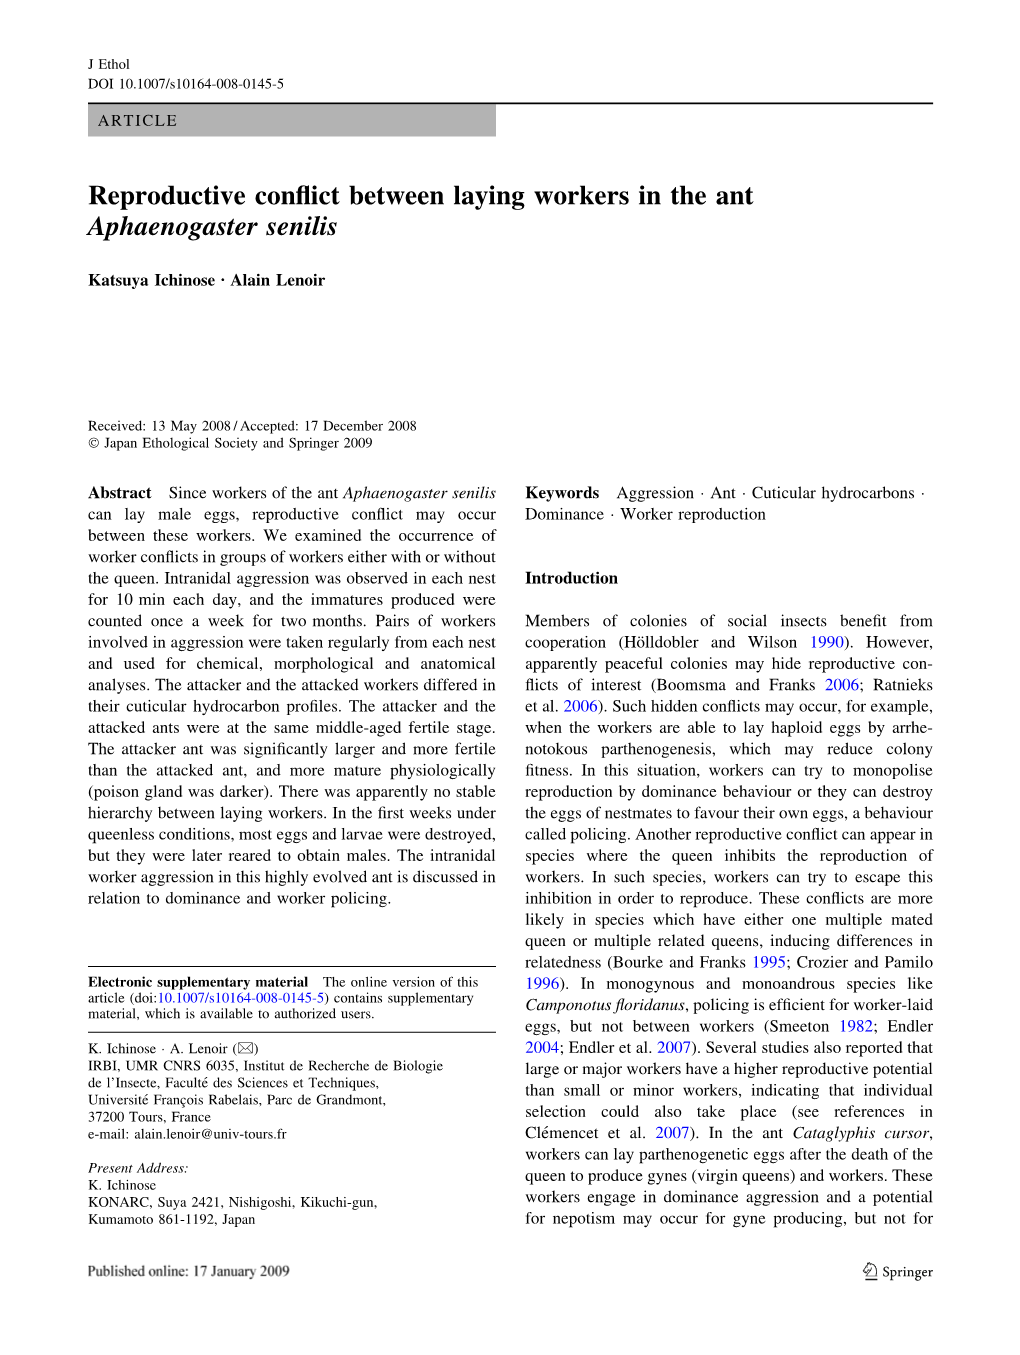 Reproductive Conflict Between Laying Workers in the Ant Aphaenogaster